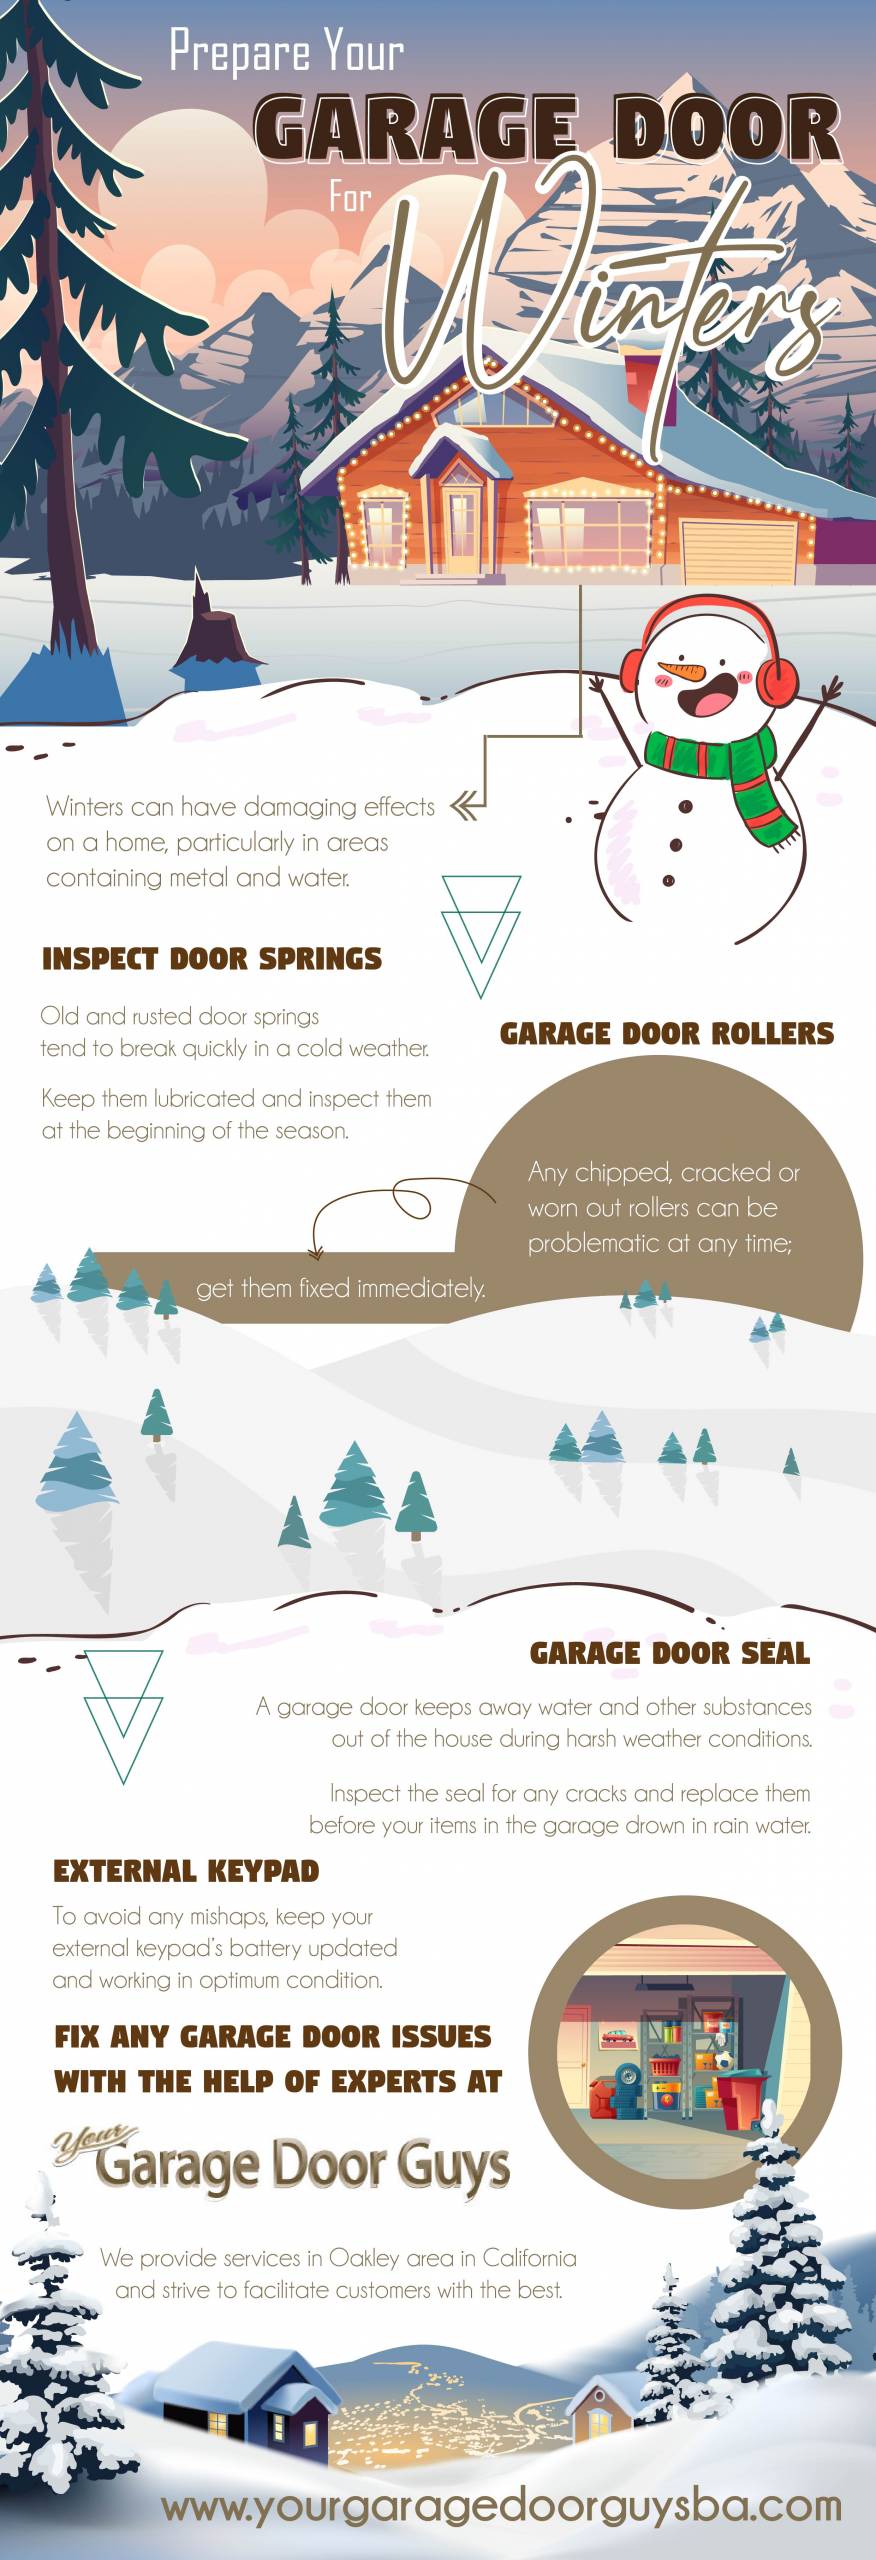 Here are the tips to Prepare Your Garage Doors For Winters